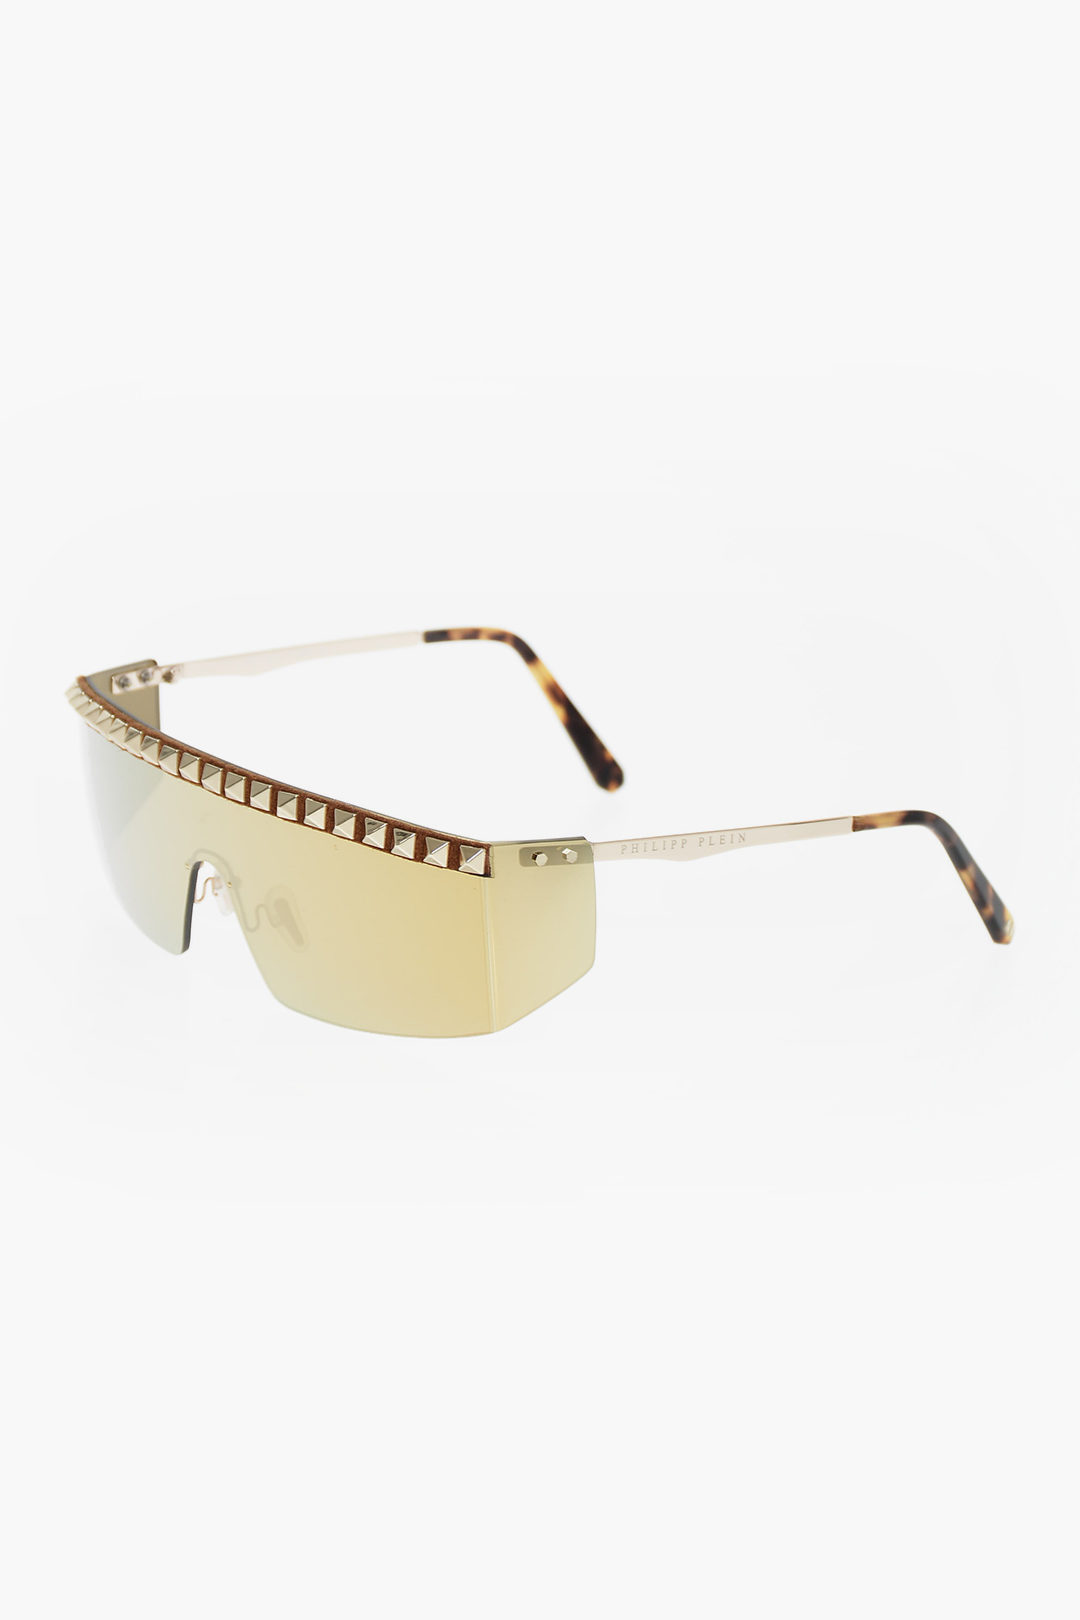 Philipp Plein shield KOBA sunglasses with studs and mirrored lenses unisex  men women - Glamood Outlet